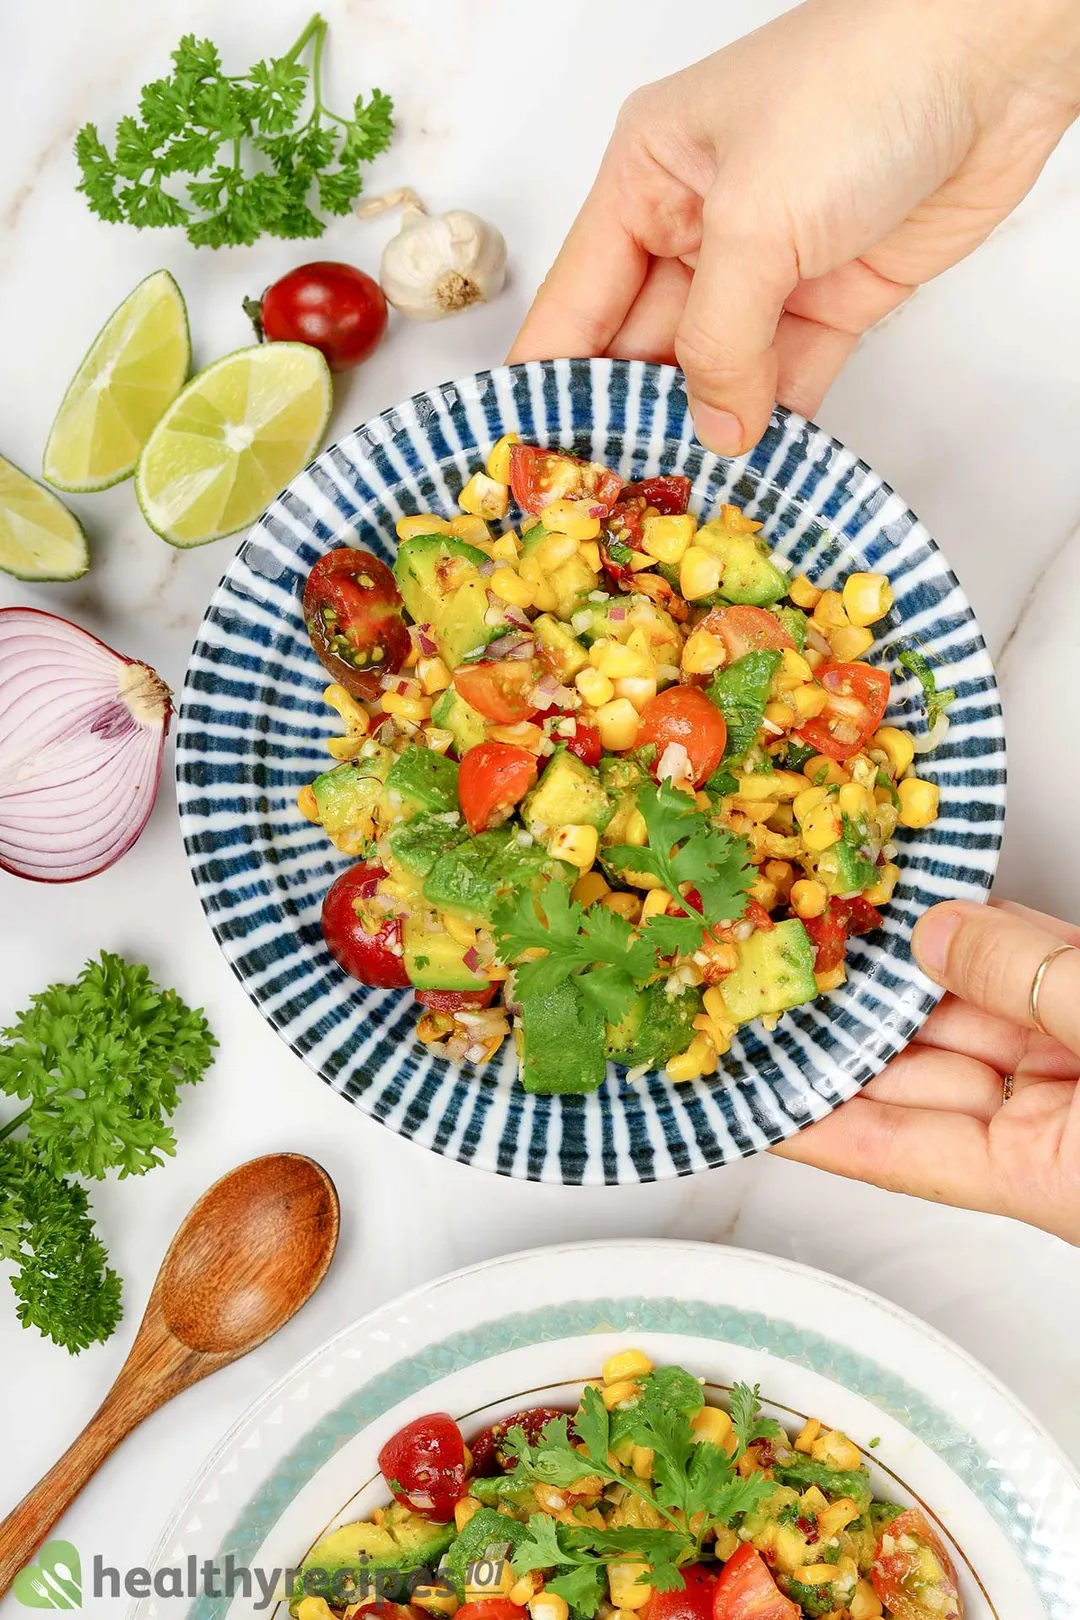 two hands holding a plate of avocado cubes, corn, tomato cubes and coriander, decorated by half onion, a wooden spoon, slices lime tomato and garlic